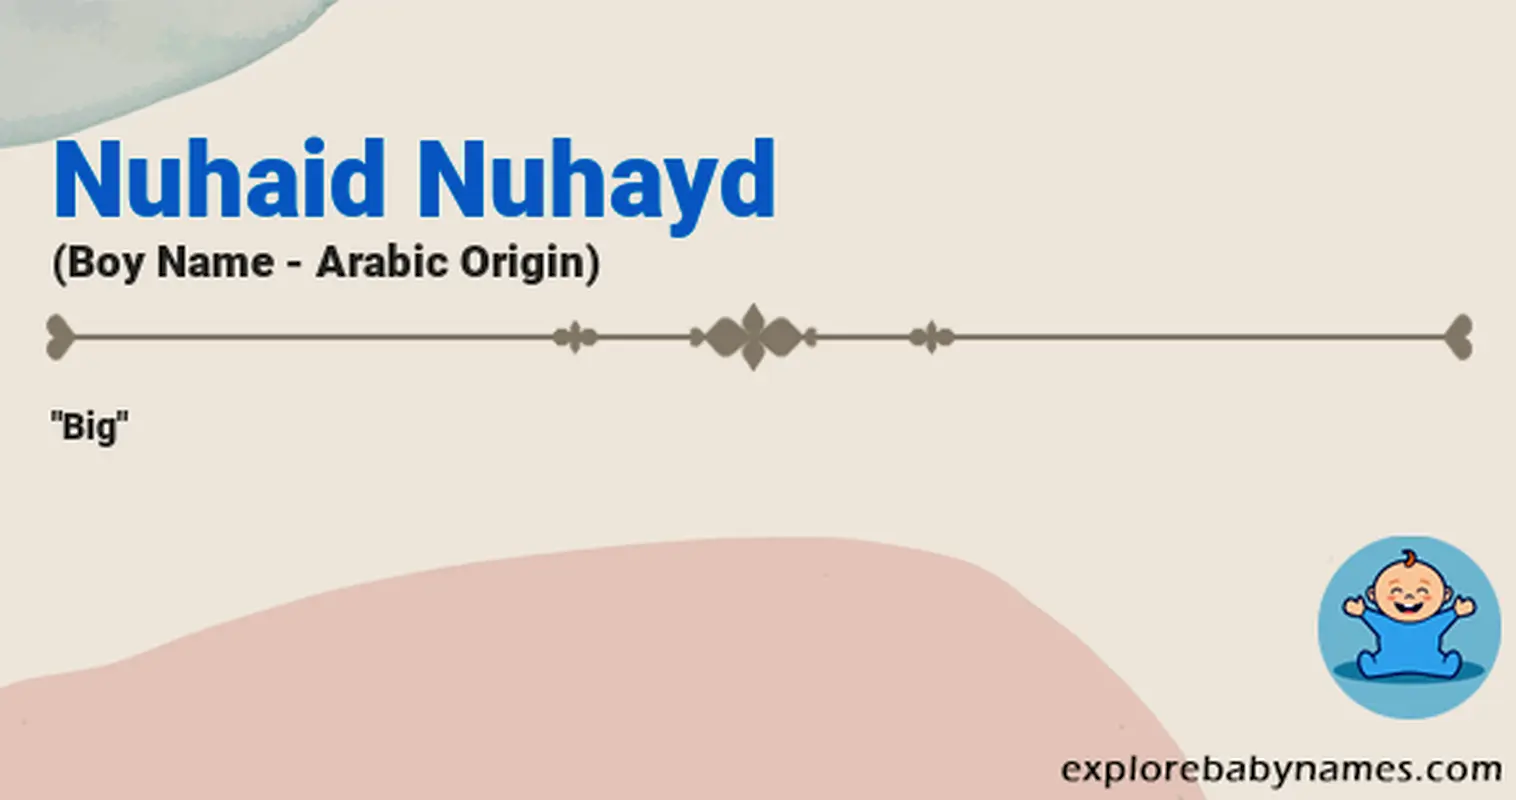 Meaning of Nuhaid Nuhayd